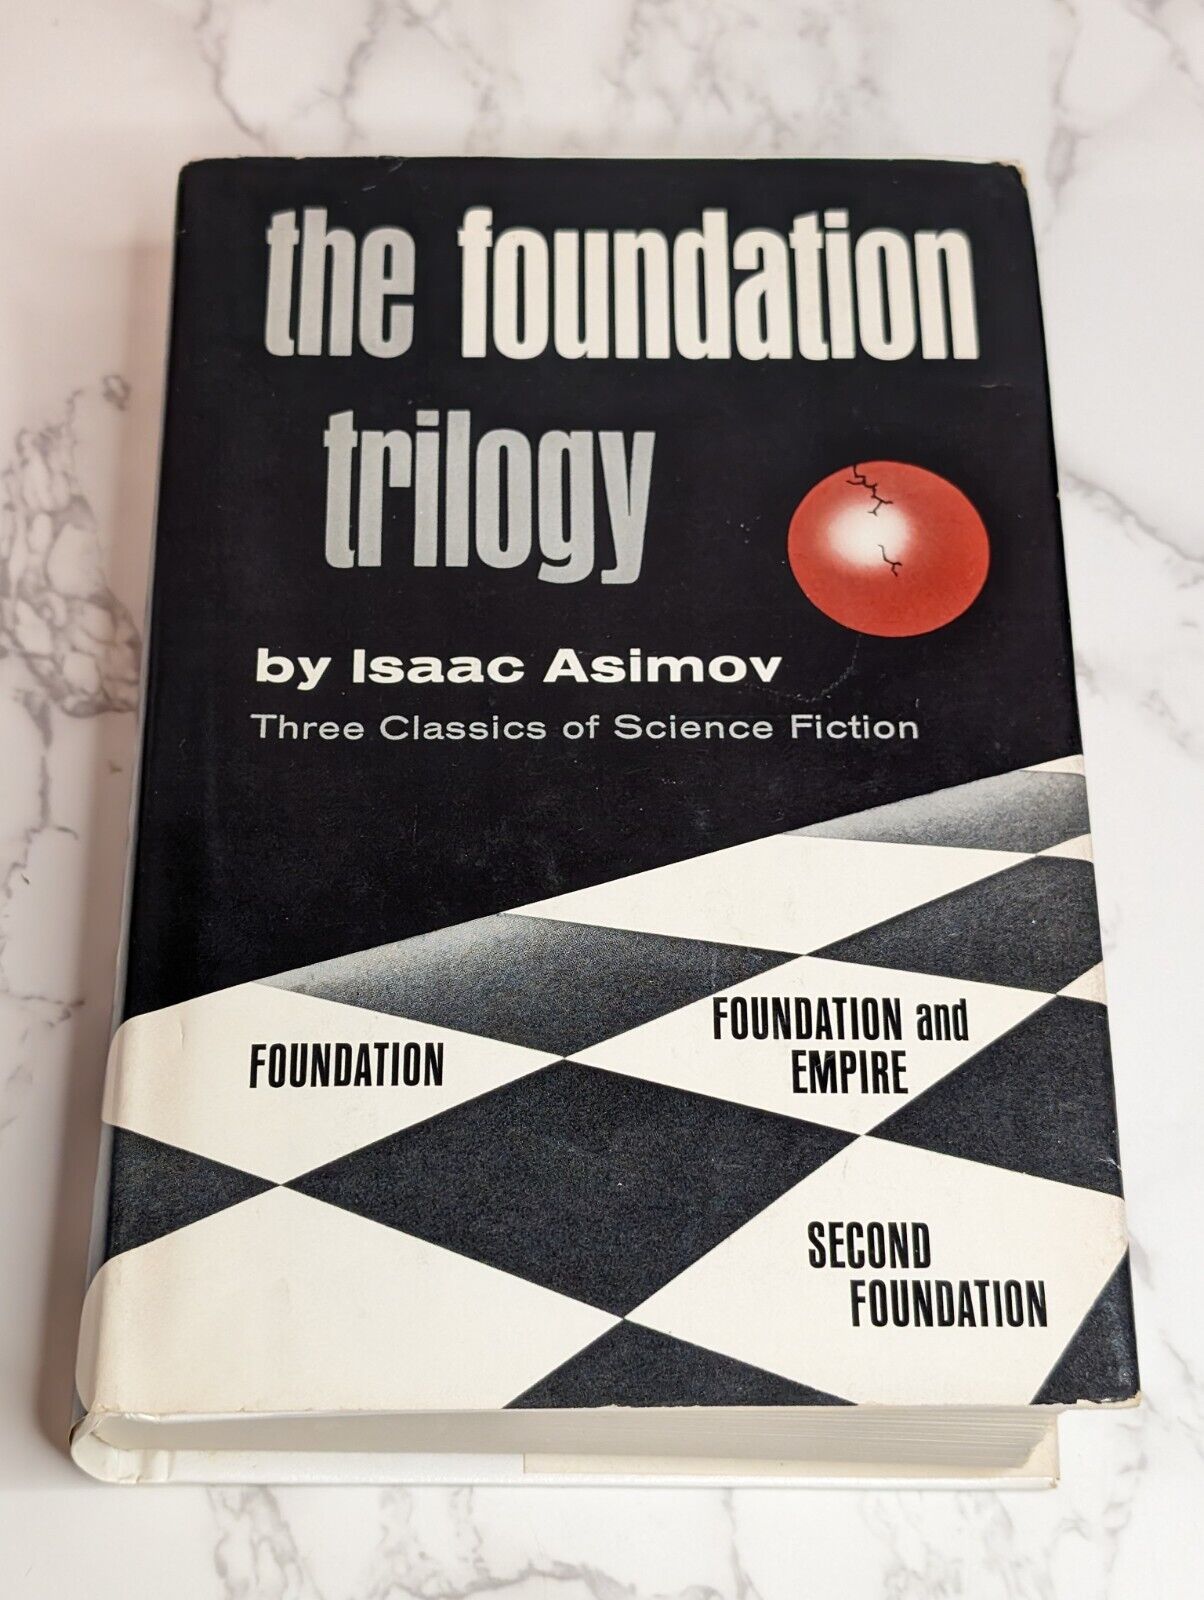 Vintage 1951 Isaac Asimov The Foundation Trilogy in Single Volume, Book Club Ed.